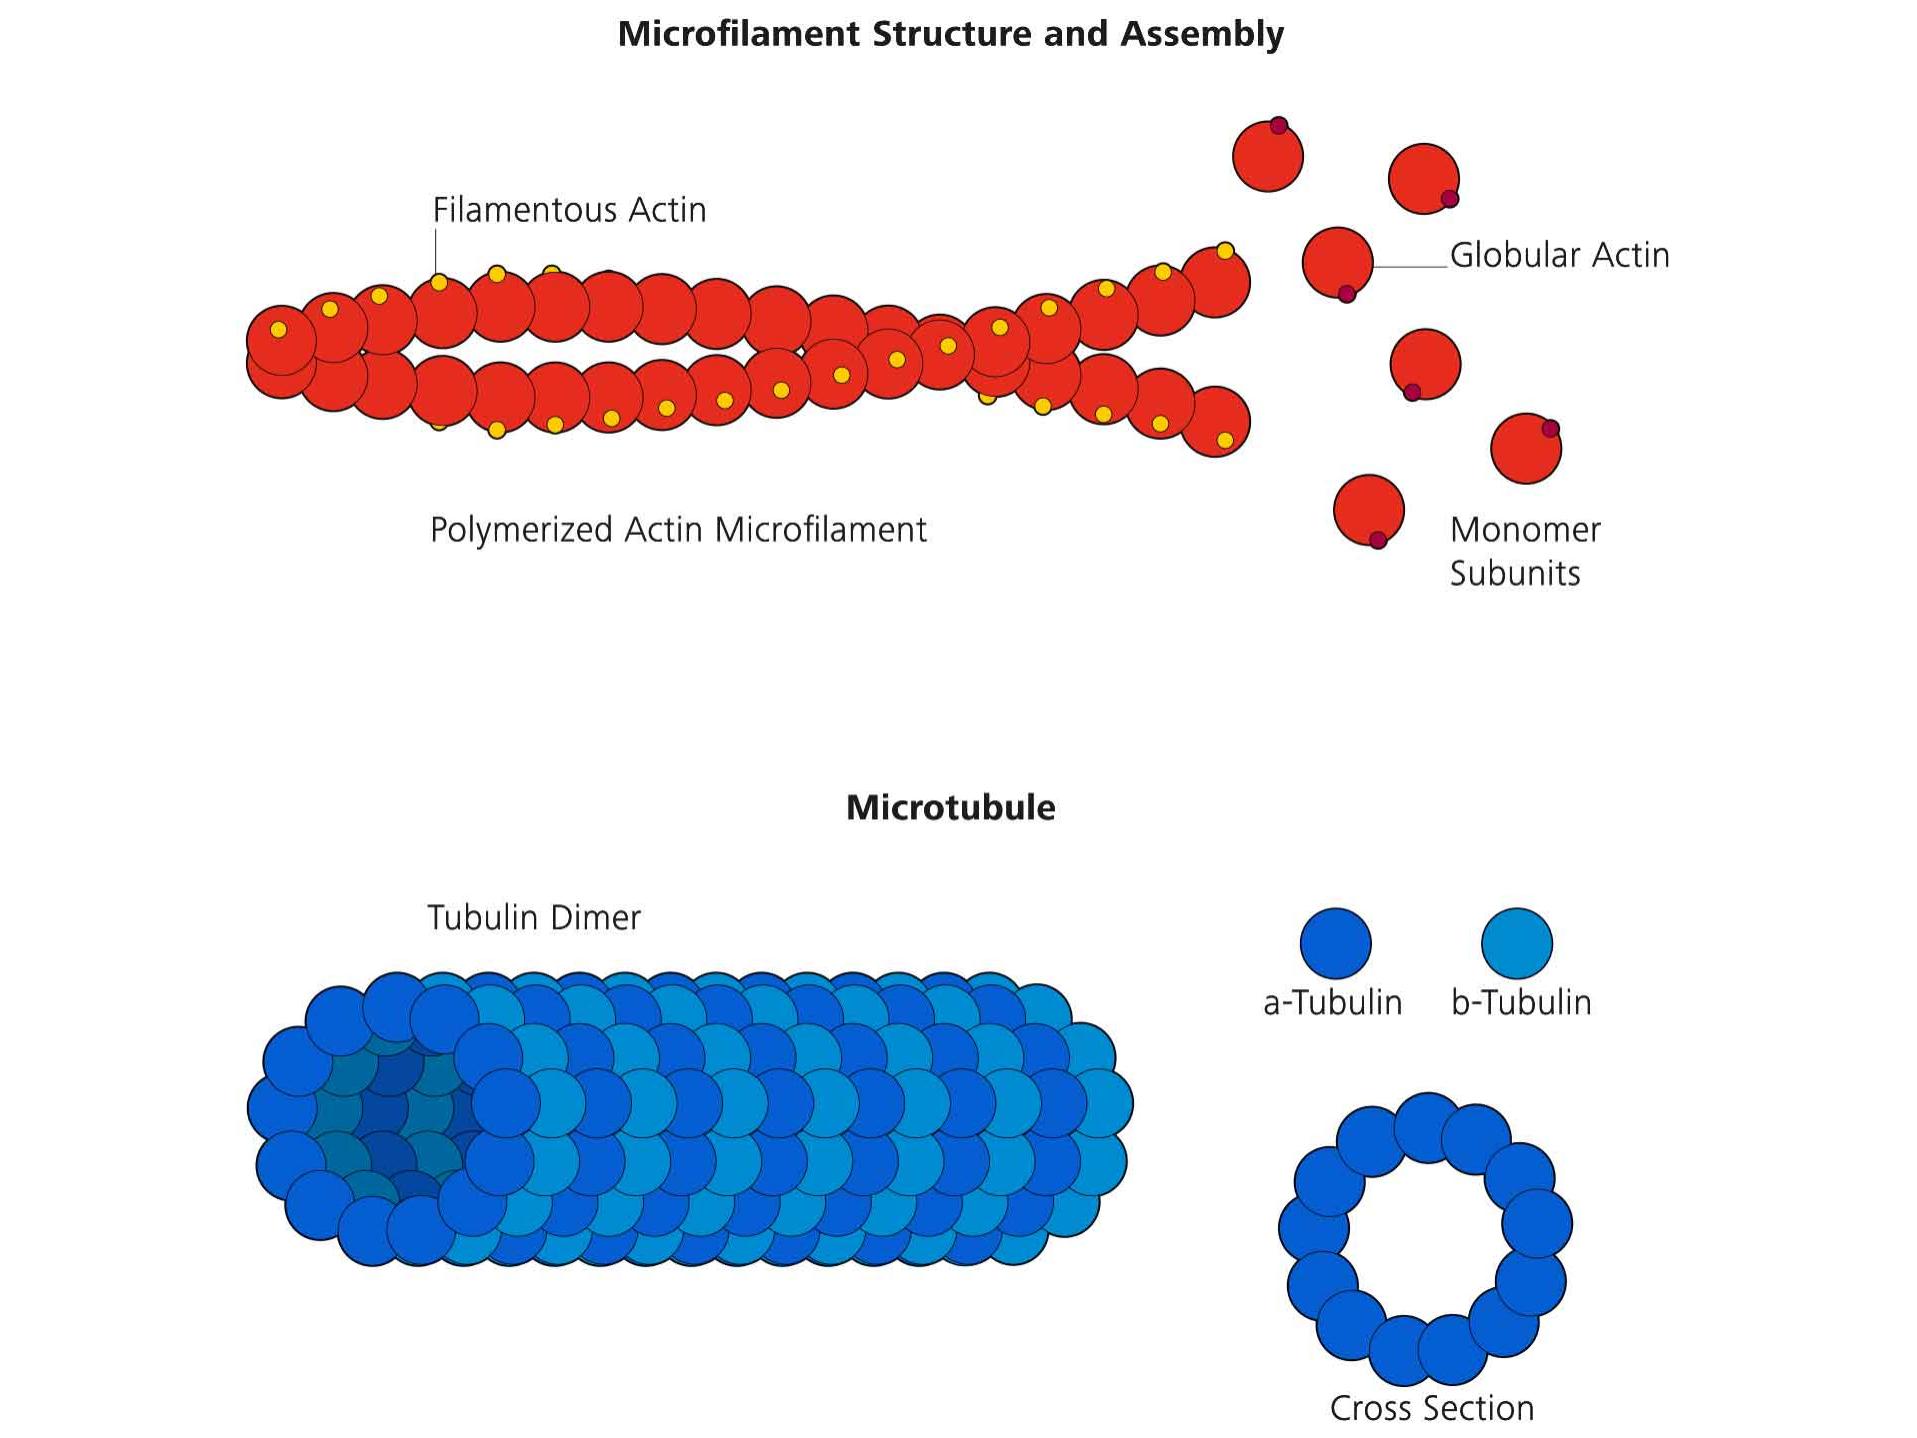 Figure 1: Structure of Actin and Microtubule Filaments